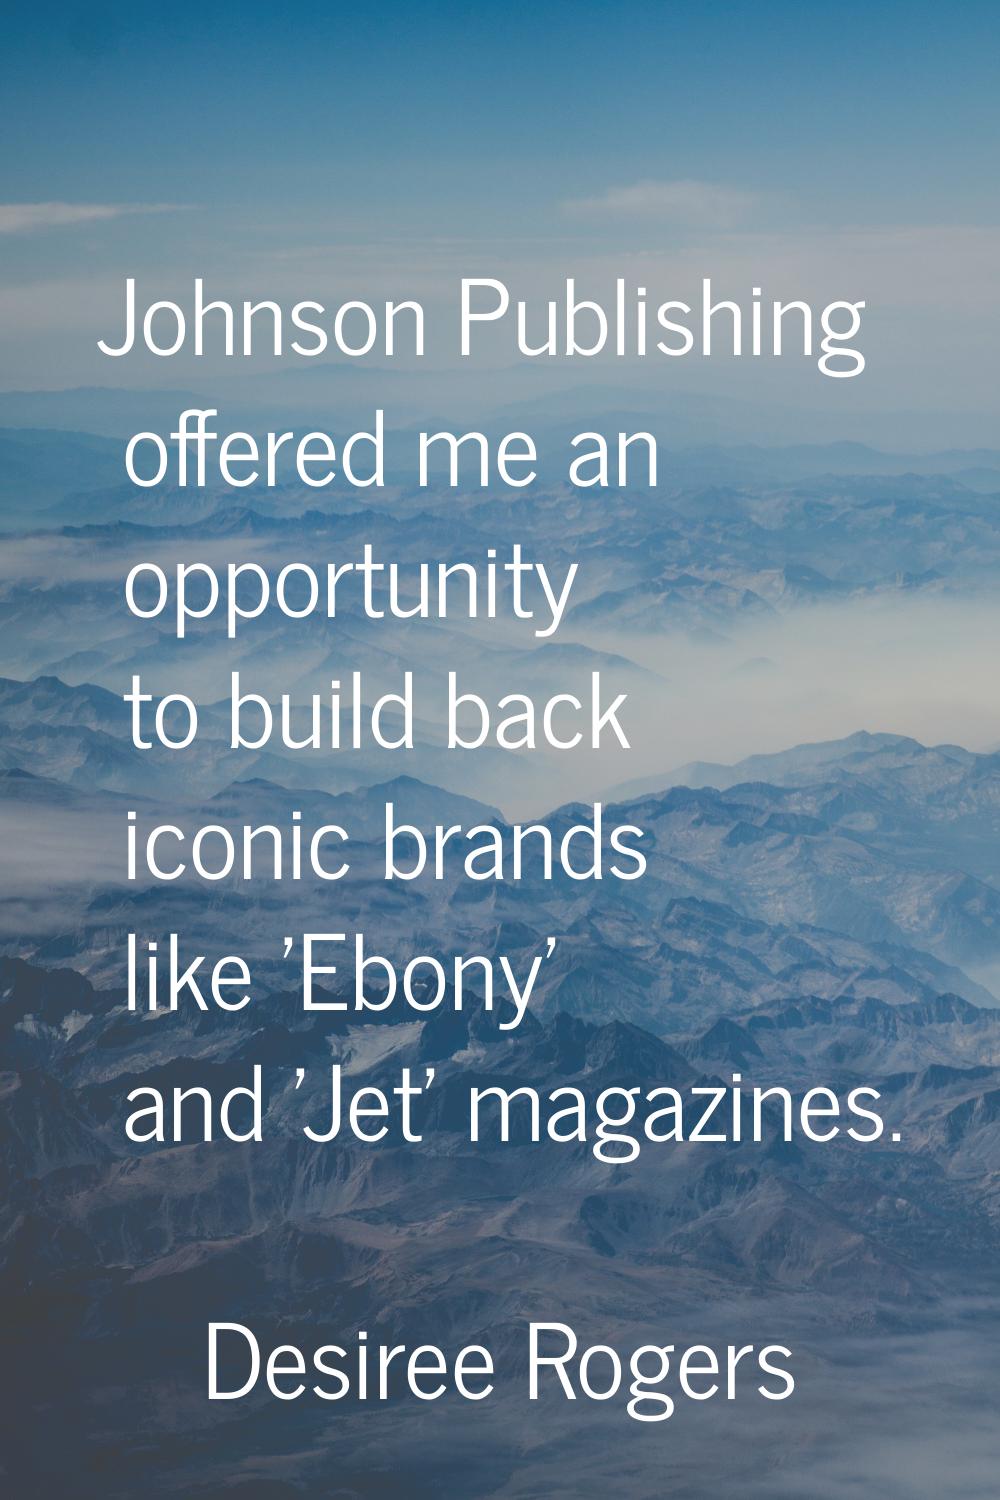 Johnson Publishing offered me an opportunity to build back iconic brands like 'Ebony' and 'Jet' mag